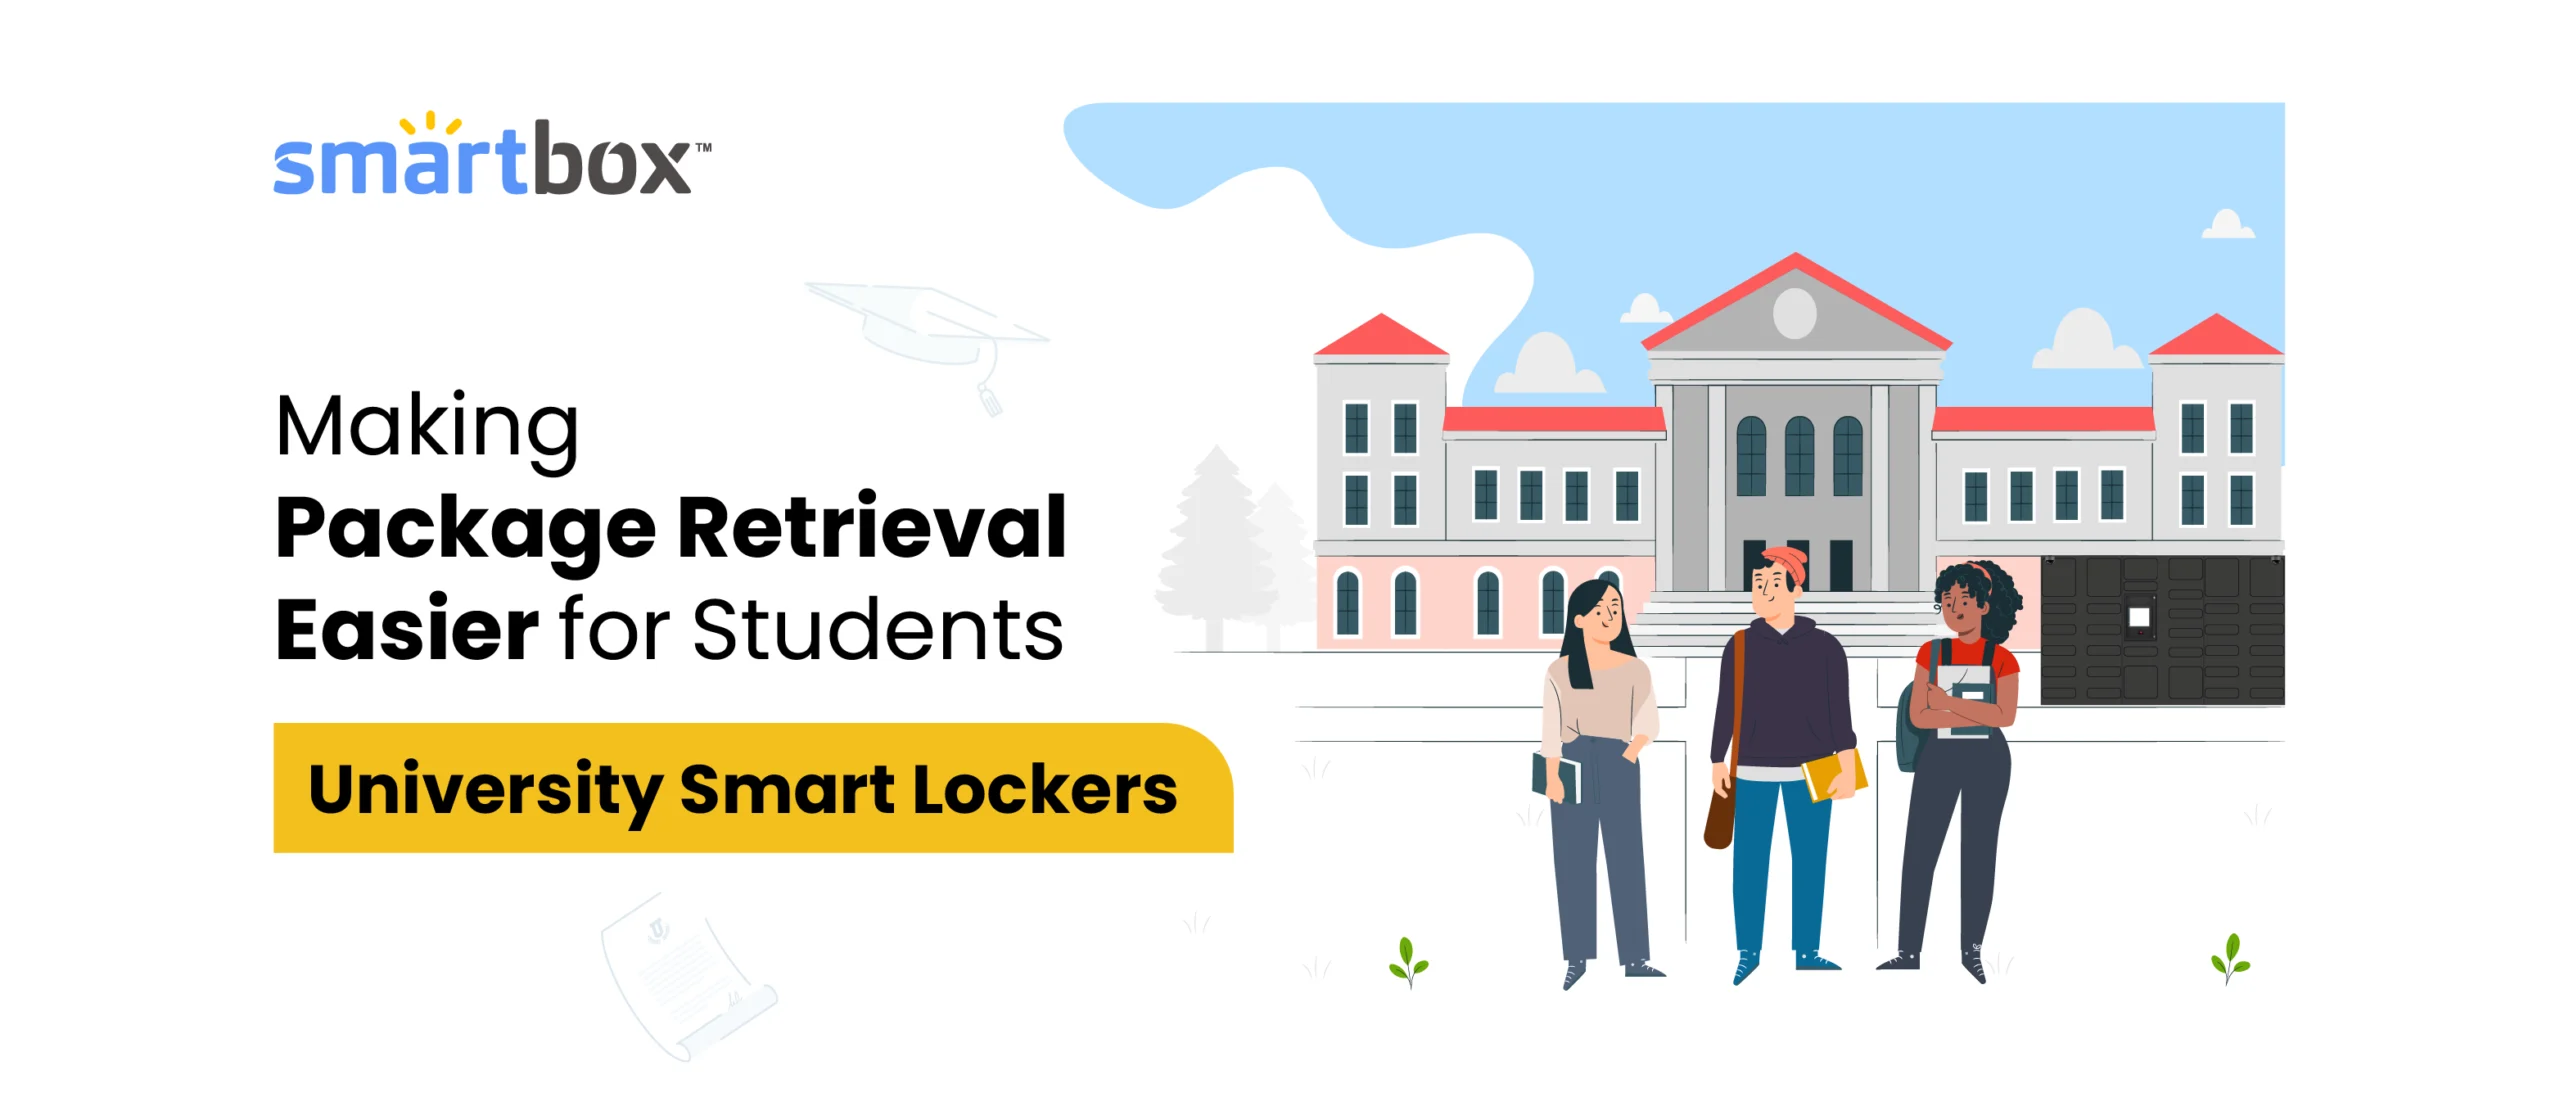 Smart university locker at a university with students in front and text - making package retrieval easier for students, university smart lockers.